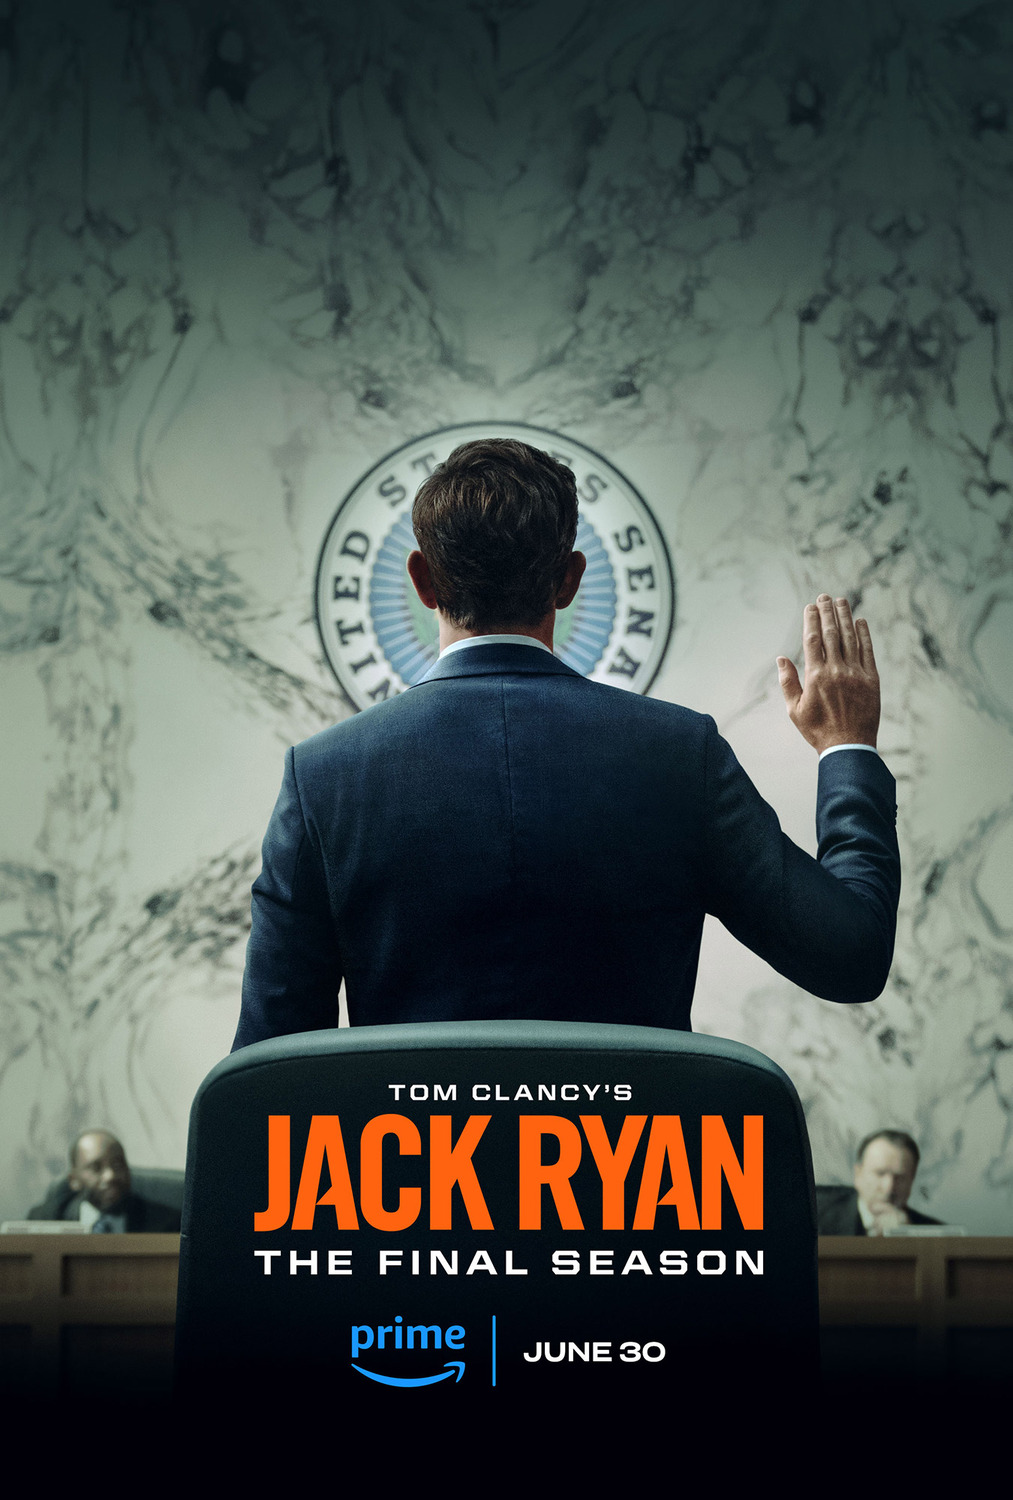 Extra Large TV Poster Image for Tom Clancy's Jack Ryan (#13 of 13)